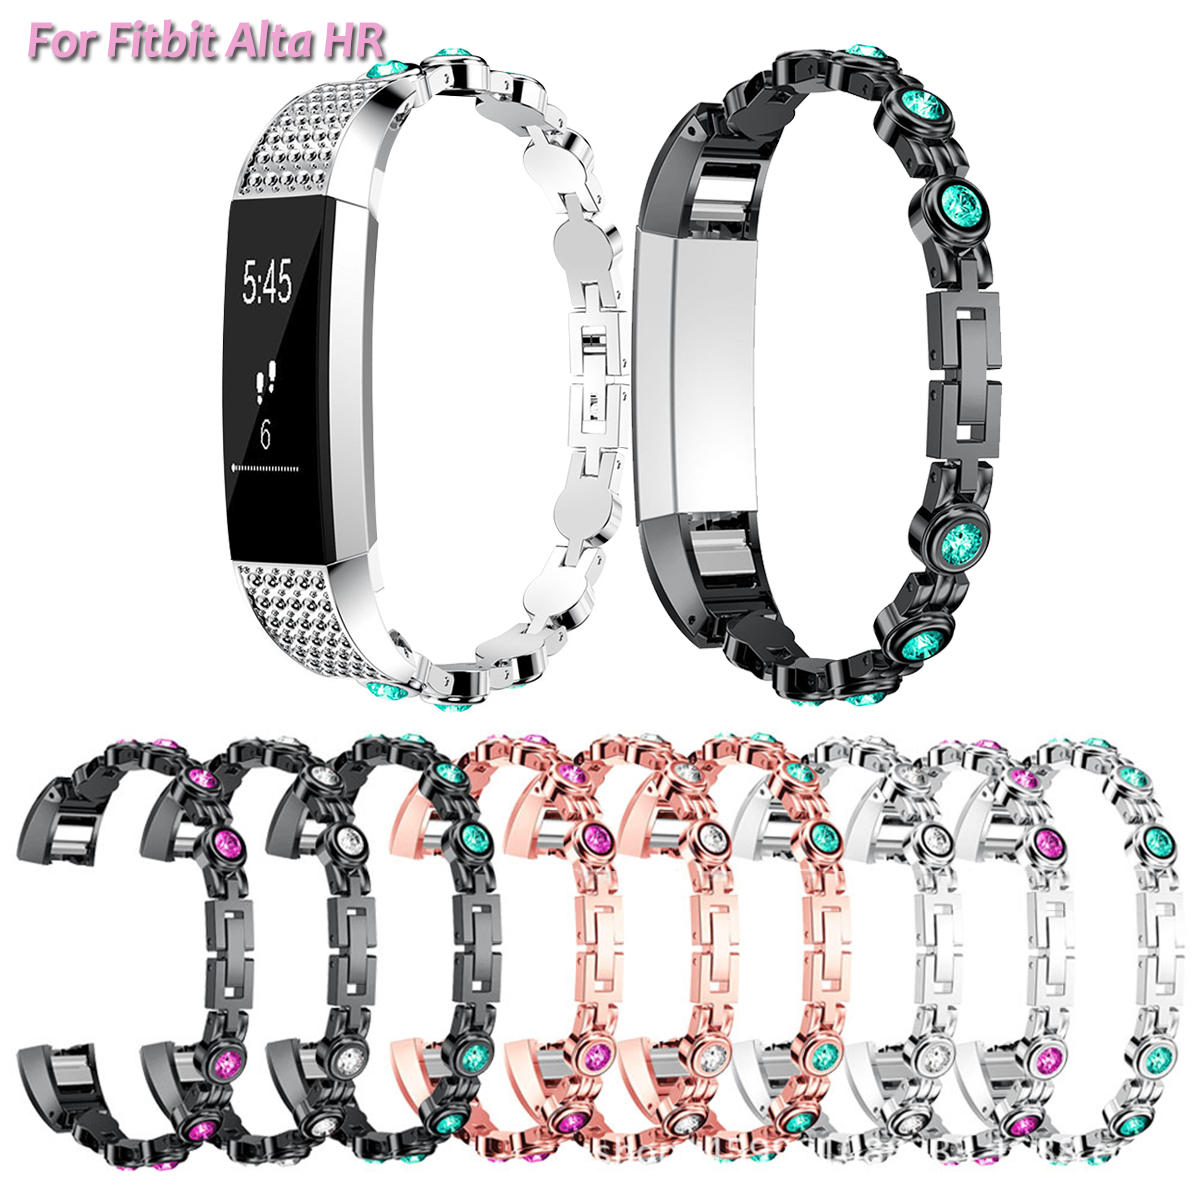 

Bakeey Replacement Stainless Steel Crystal Colorful Smart Watch Band for Fitbit Alta Fitbit HR